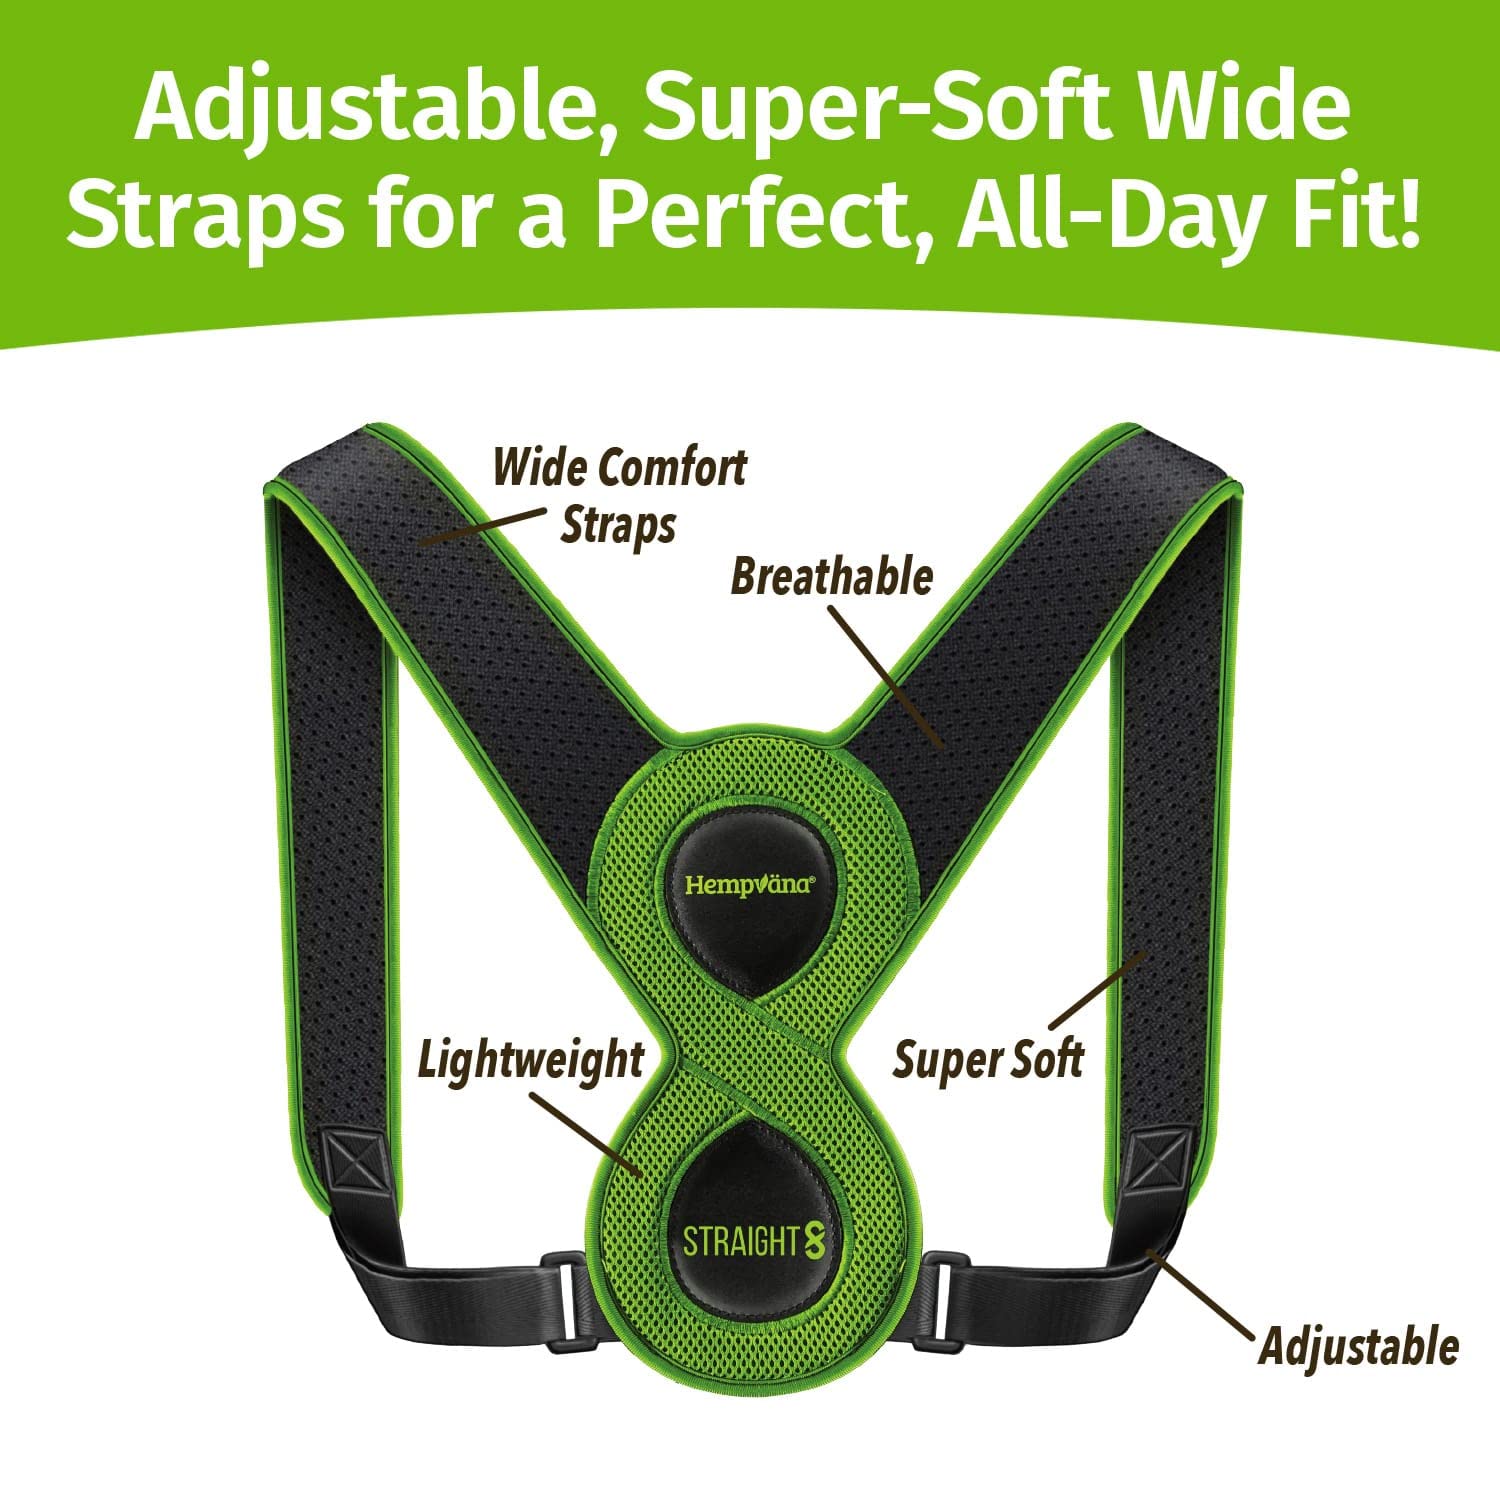 Hempvana Straight 8 Fully Adjustable Lightweight Posture Corrector, As Seen On TV, Helps Relieve Back Strain, Slouching & Text Neck, Moisture-Wicking Hemp Fibers, Eight Points of Support, One Size